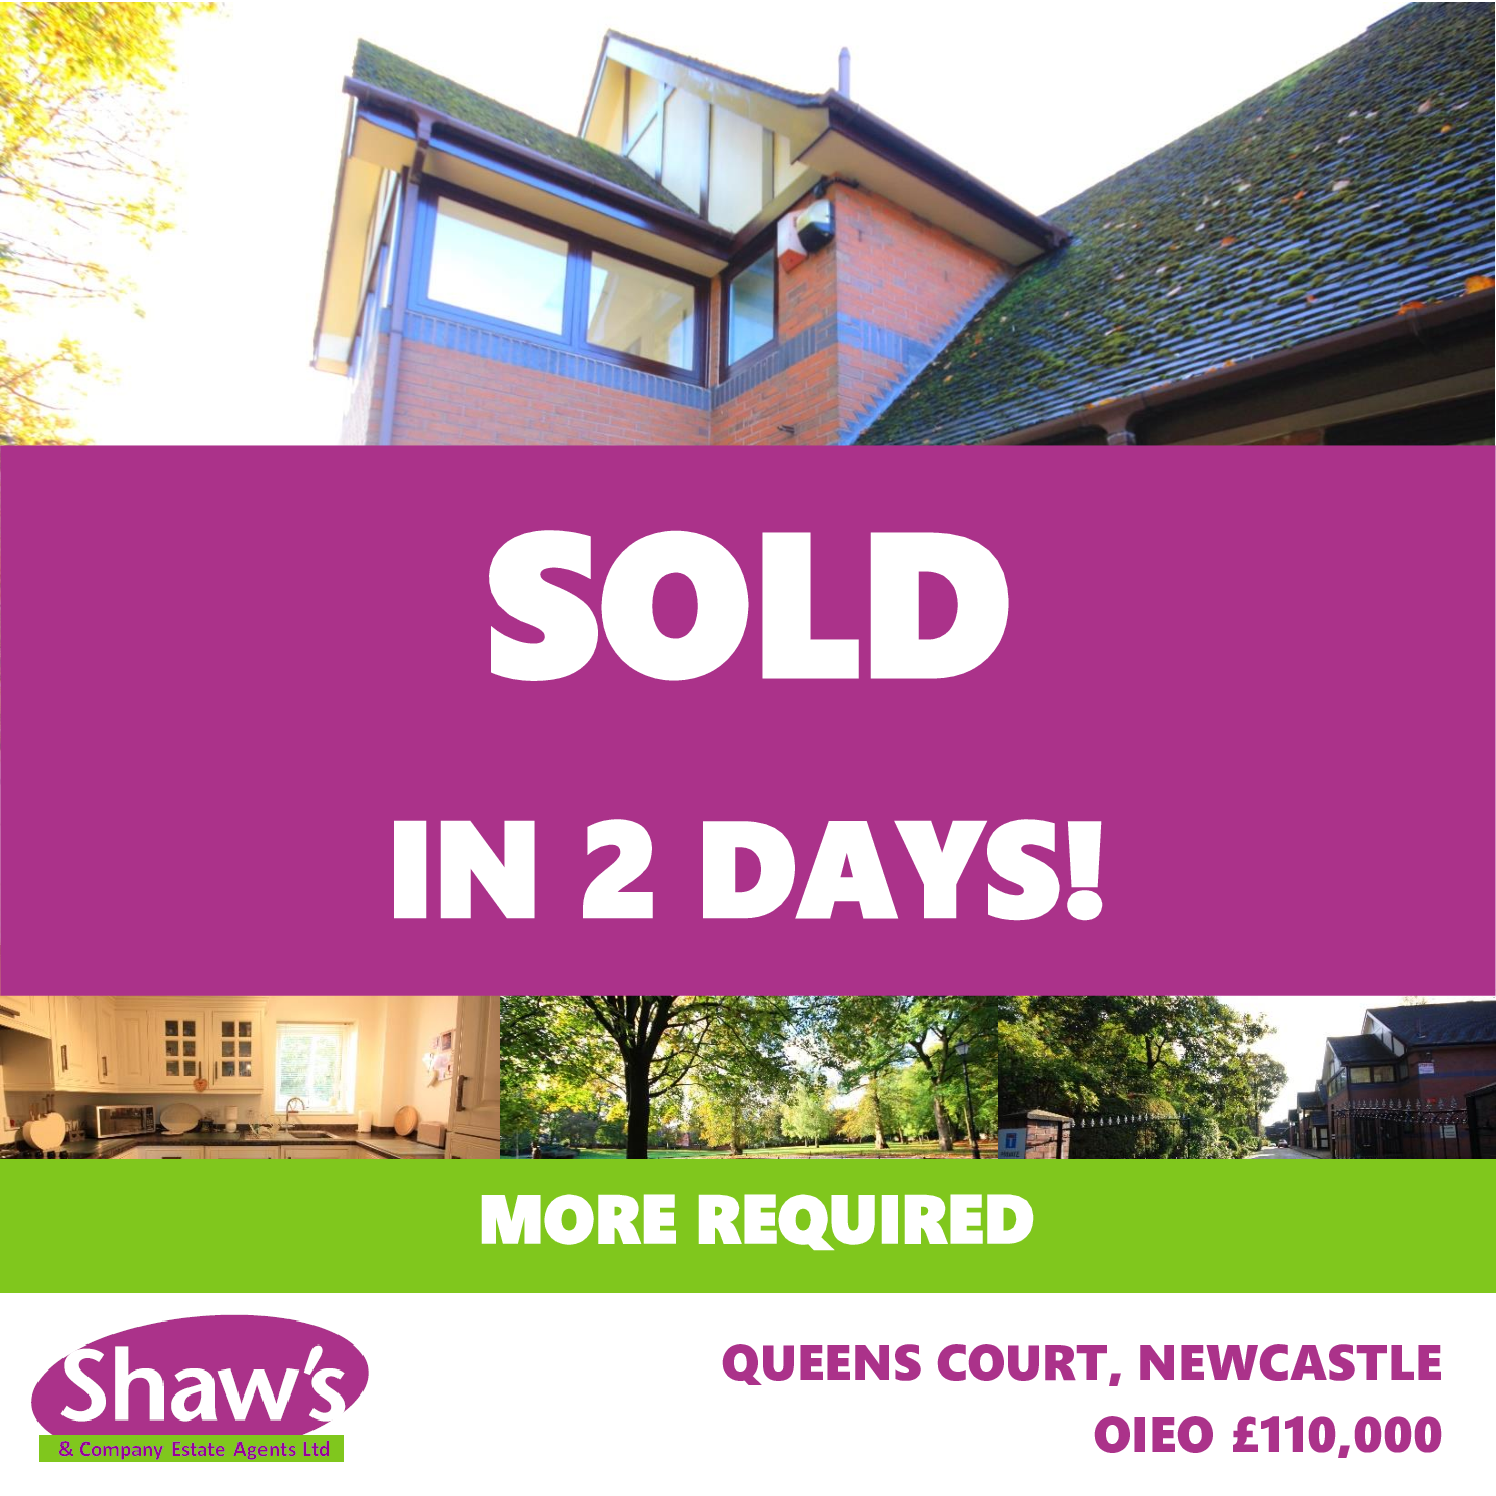 SOLD IN 2 DAYS!